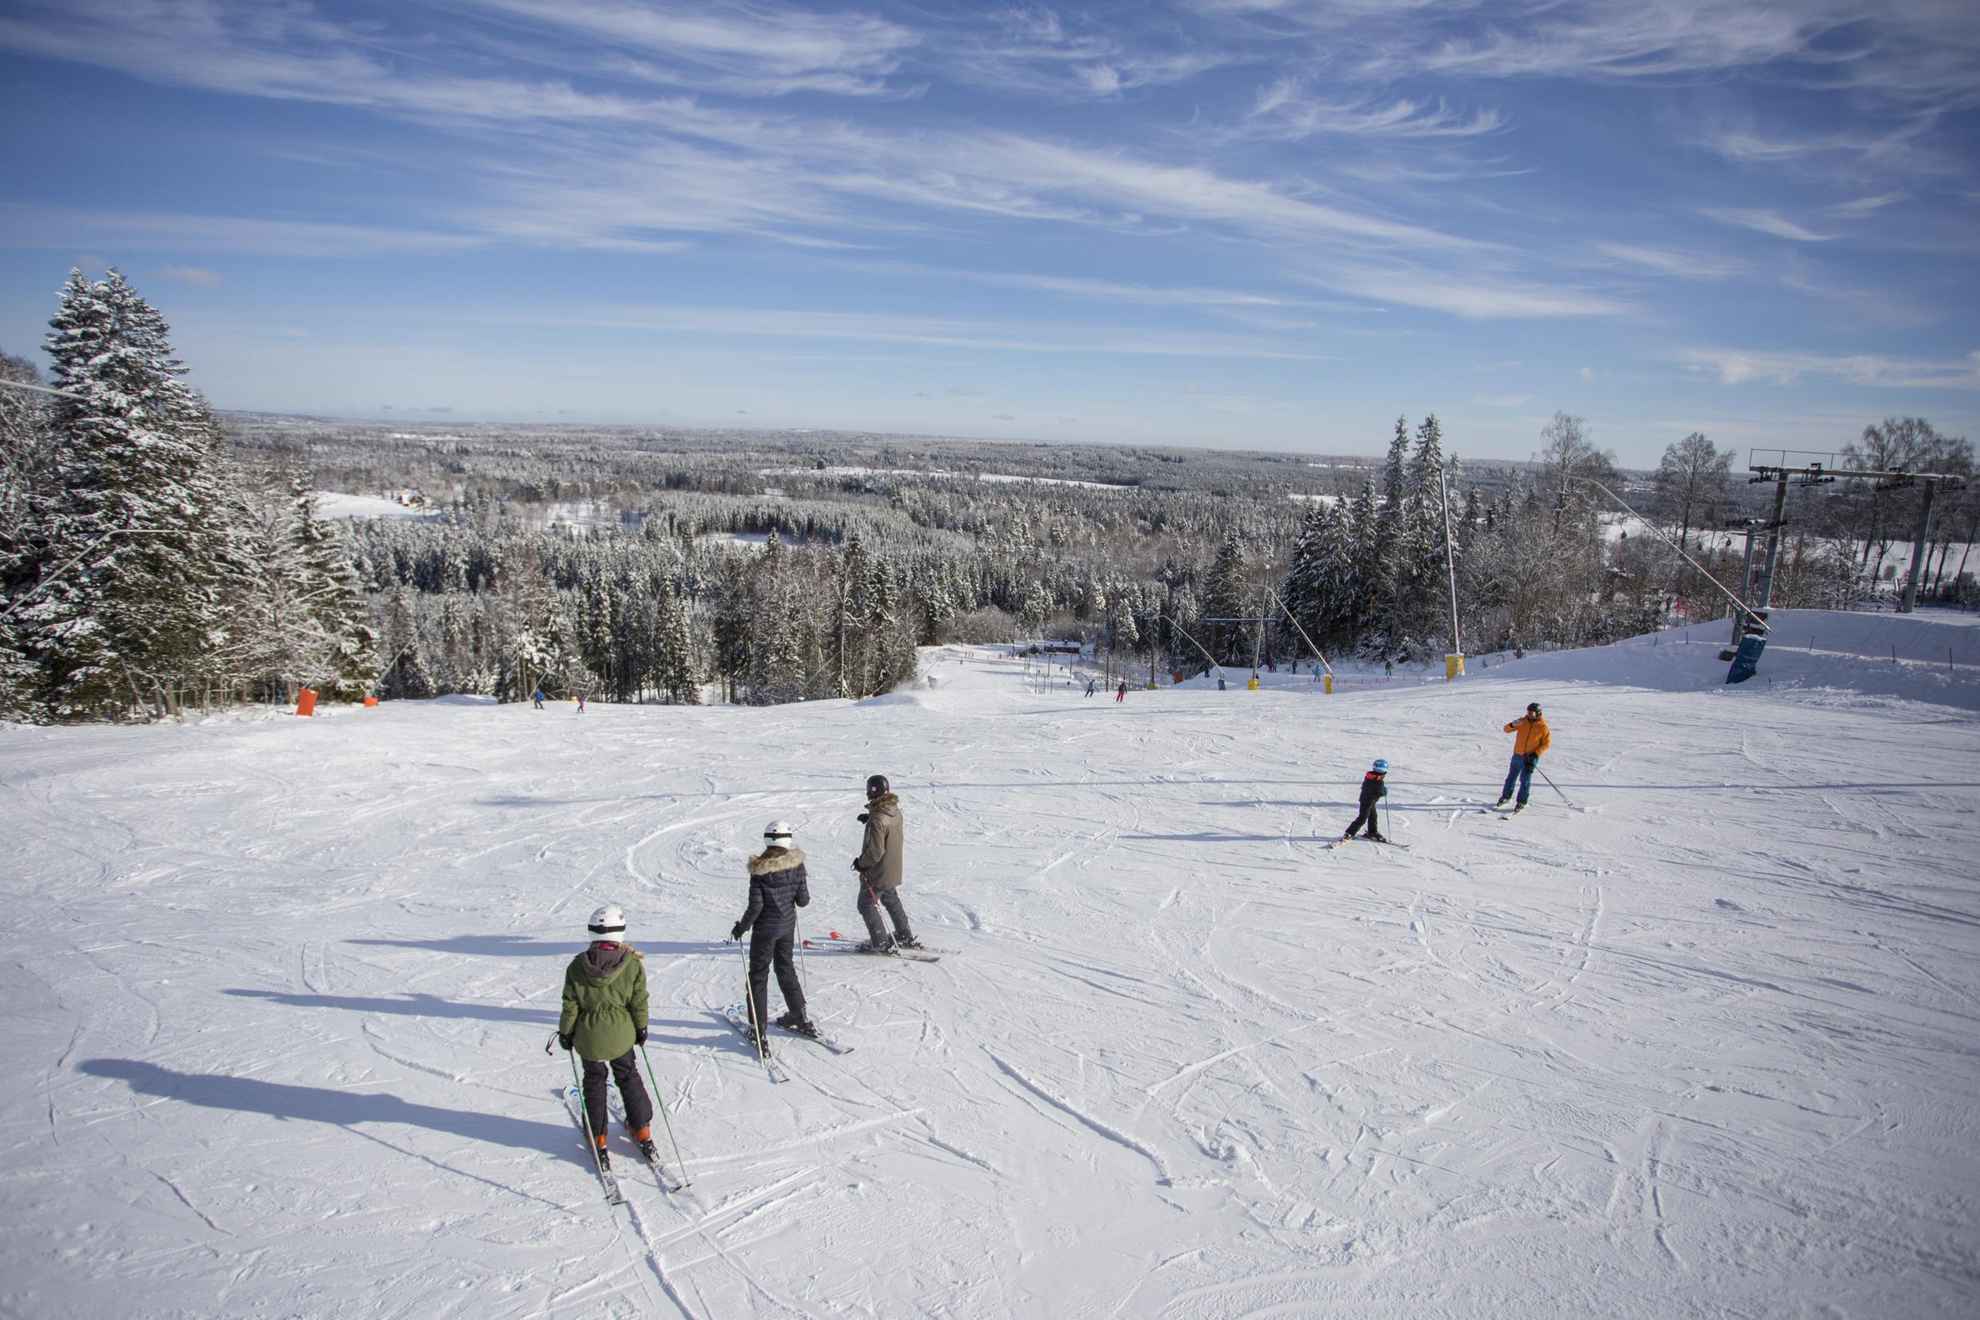 People skiing down a slope with a view of a snow-covered landscape.